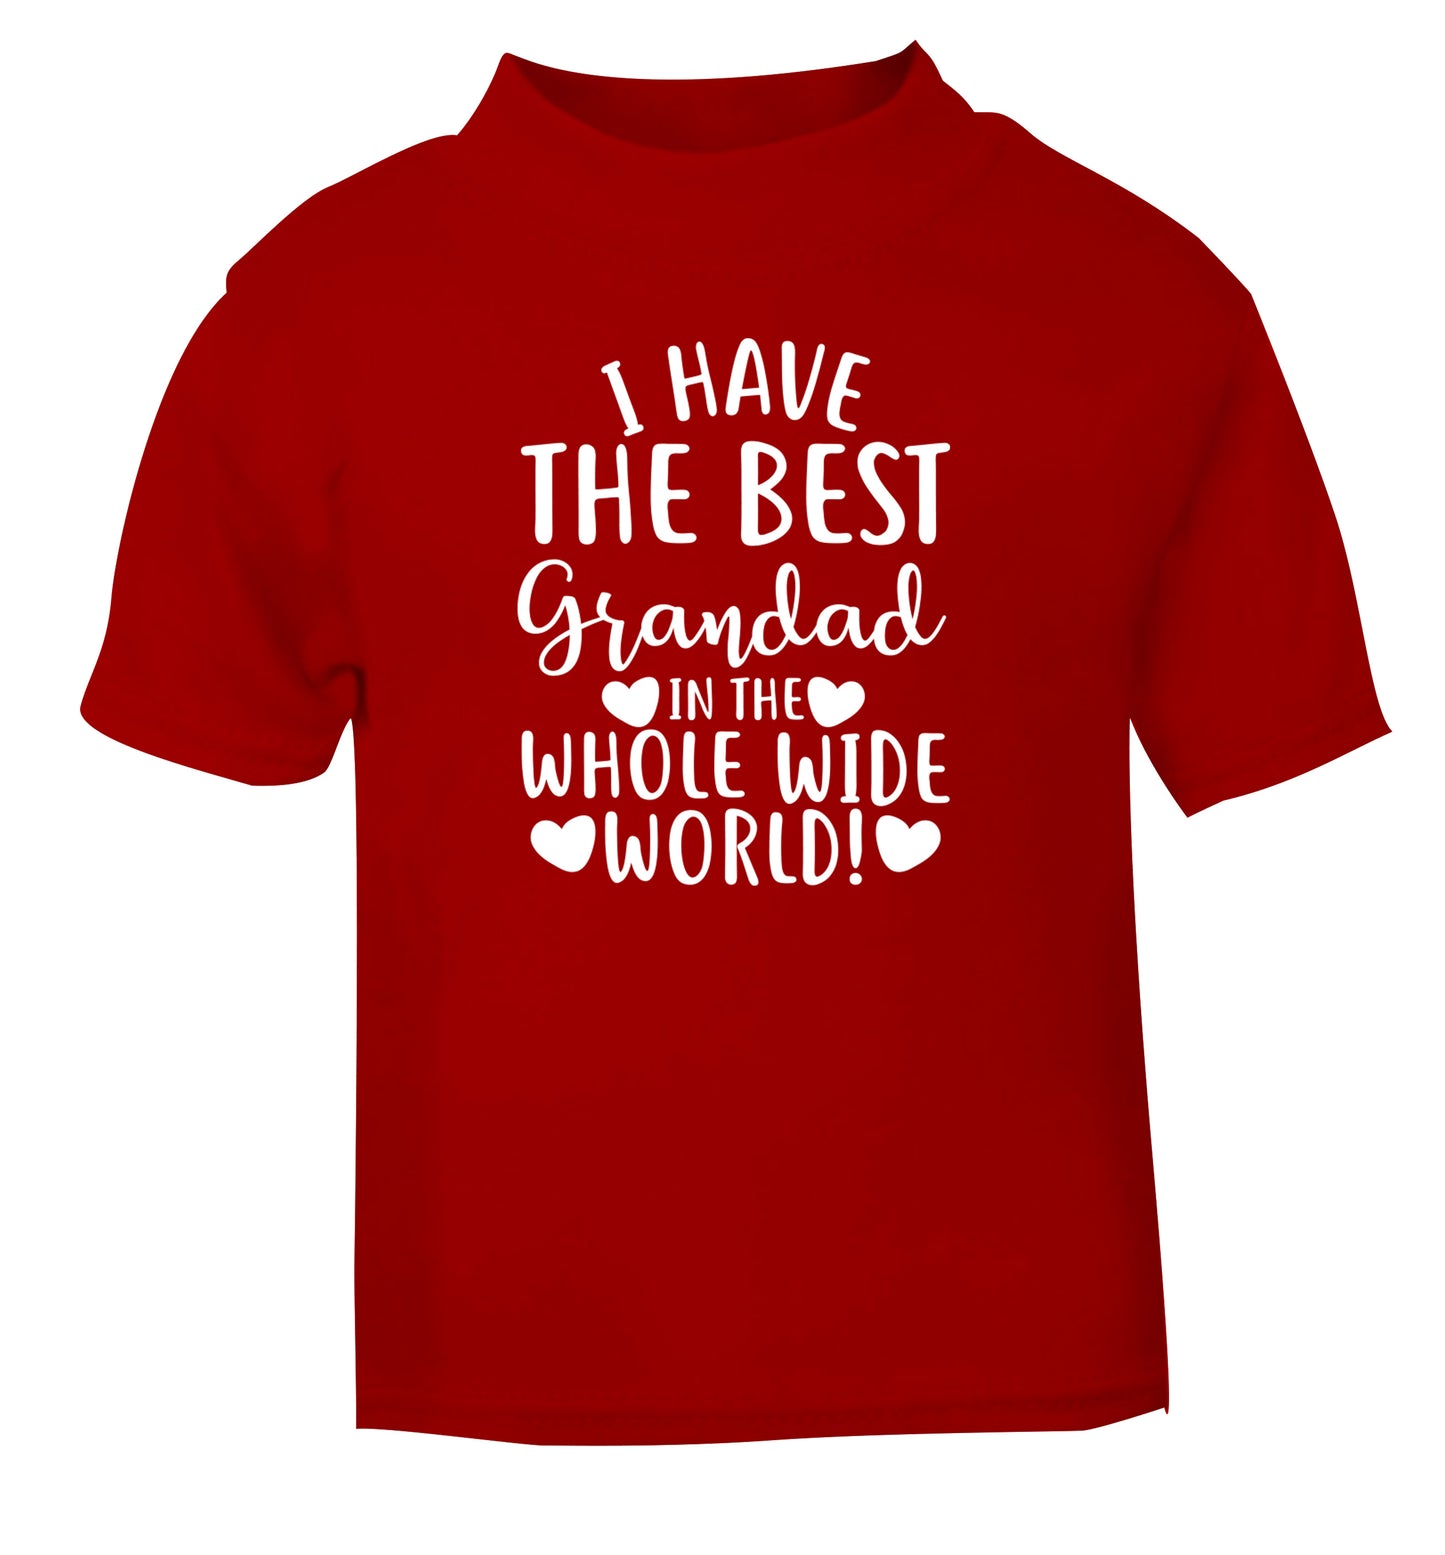 I have the best grandad in the whole wide world! red Baby Toddler Tshirt 2 Years